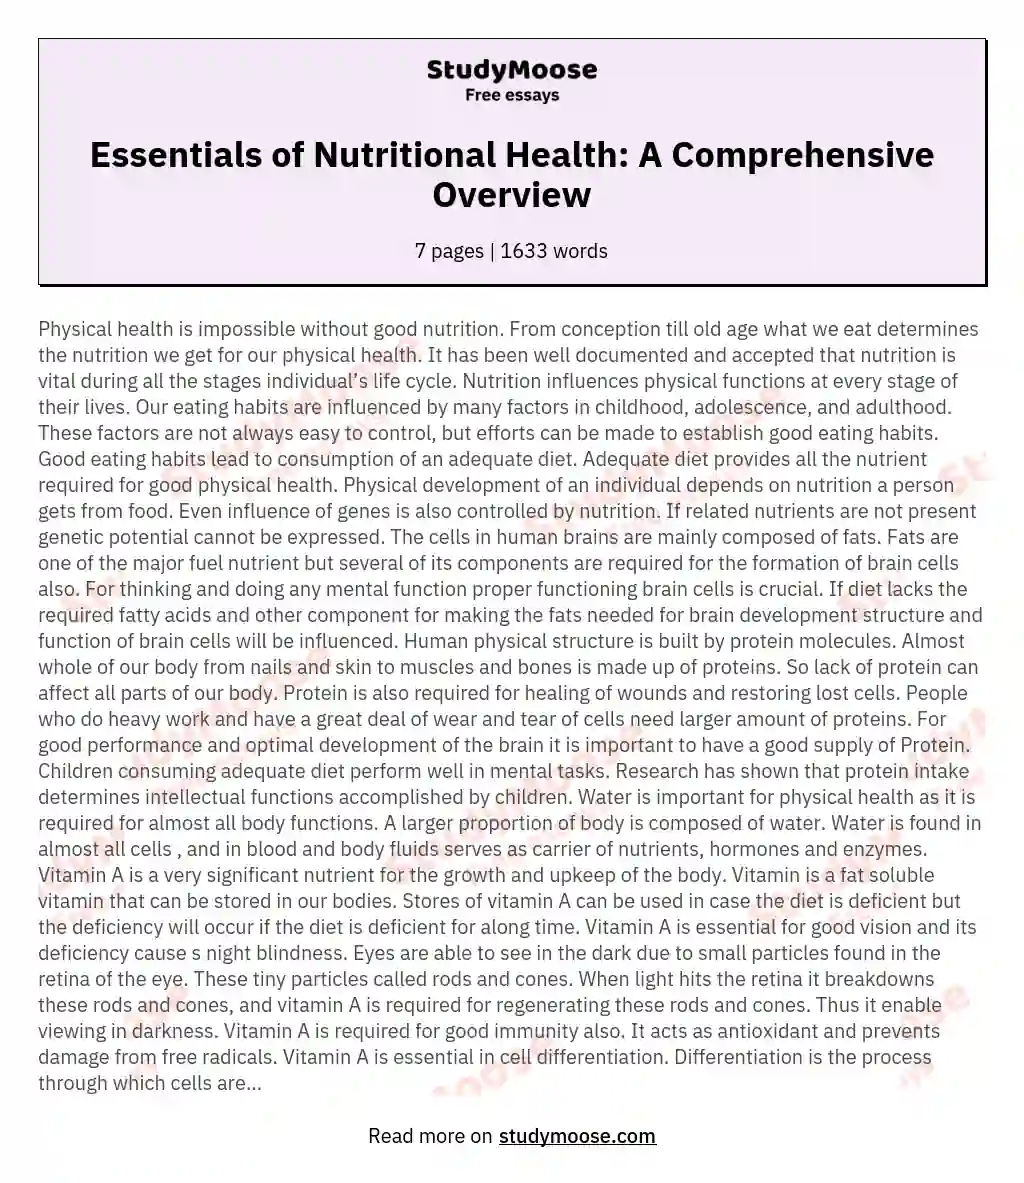 Essentials of Nutritional Health: A Comprehensive Overview essay